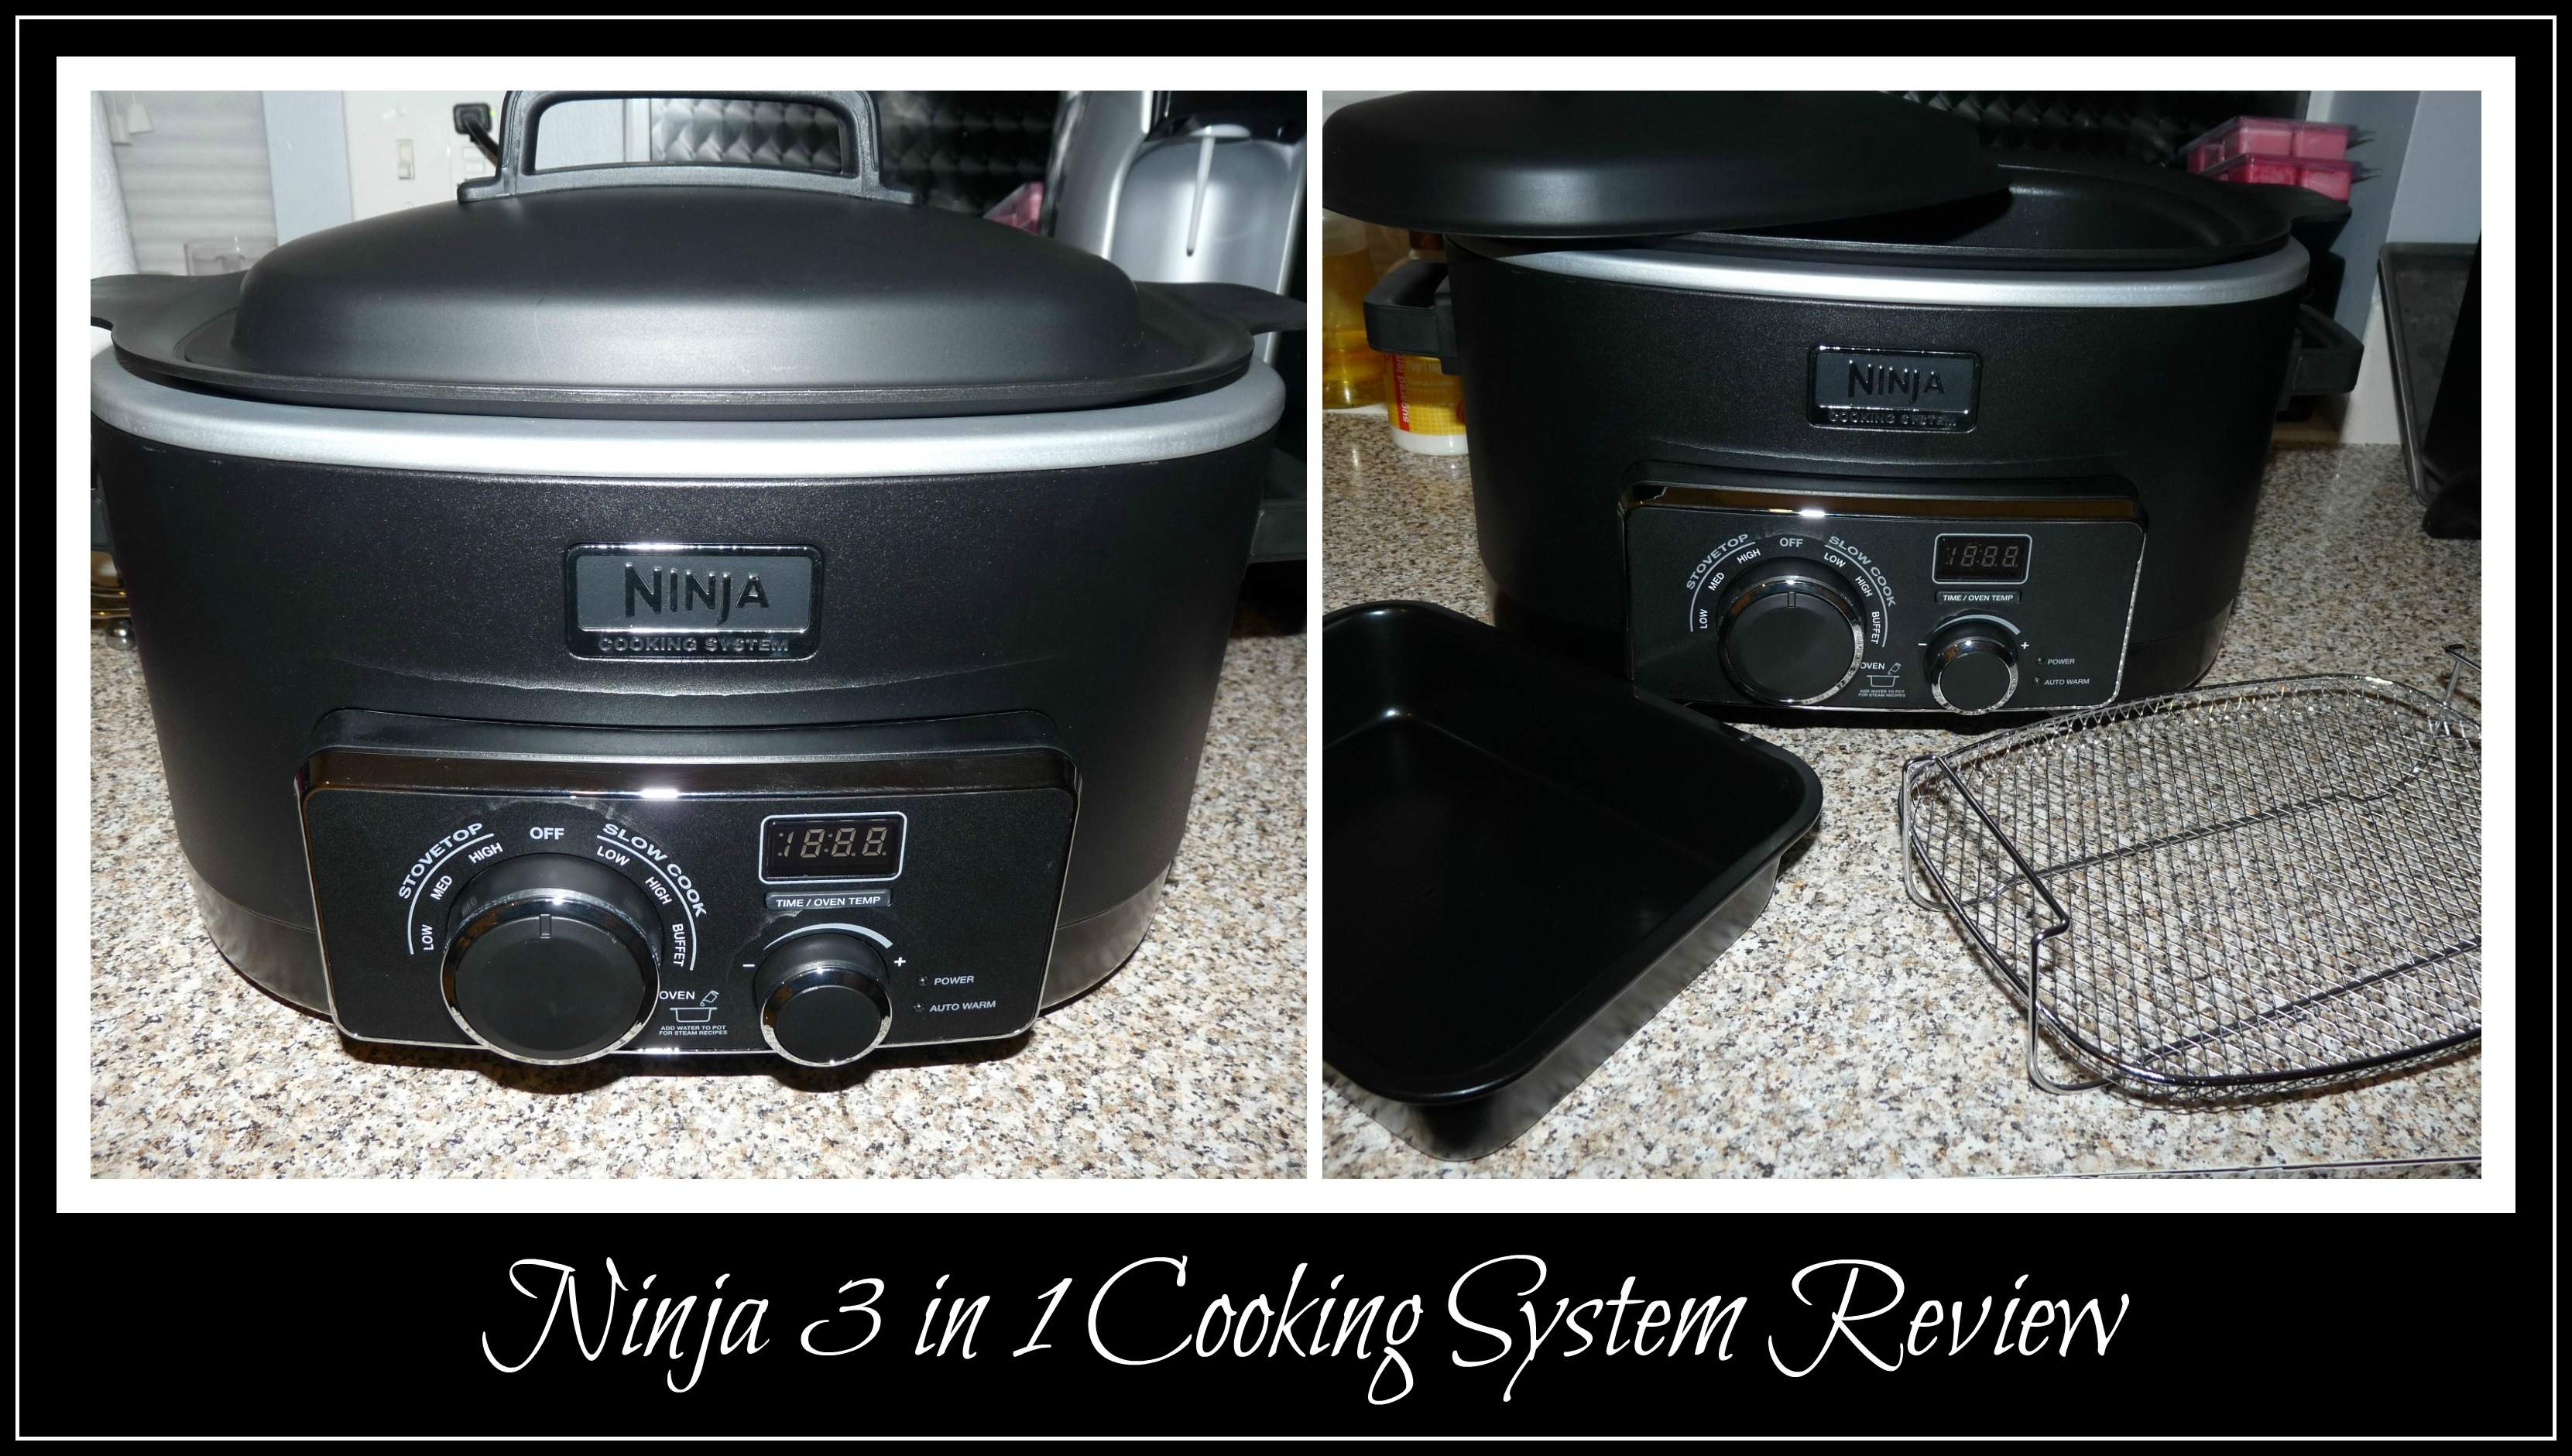 Ninja Multicooker (3 in 1) System - Slow Cooker, Stove Top, and